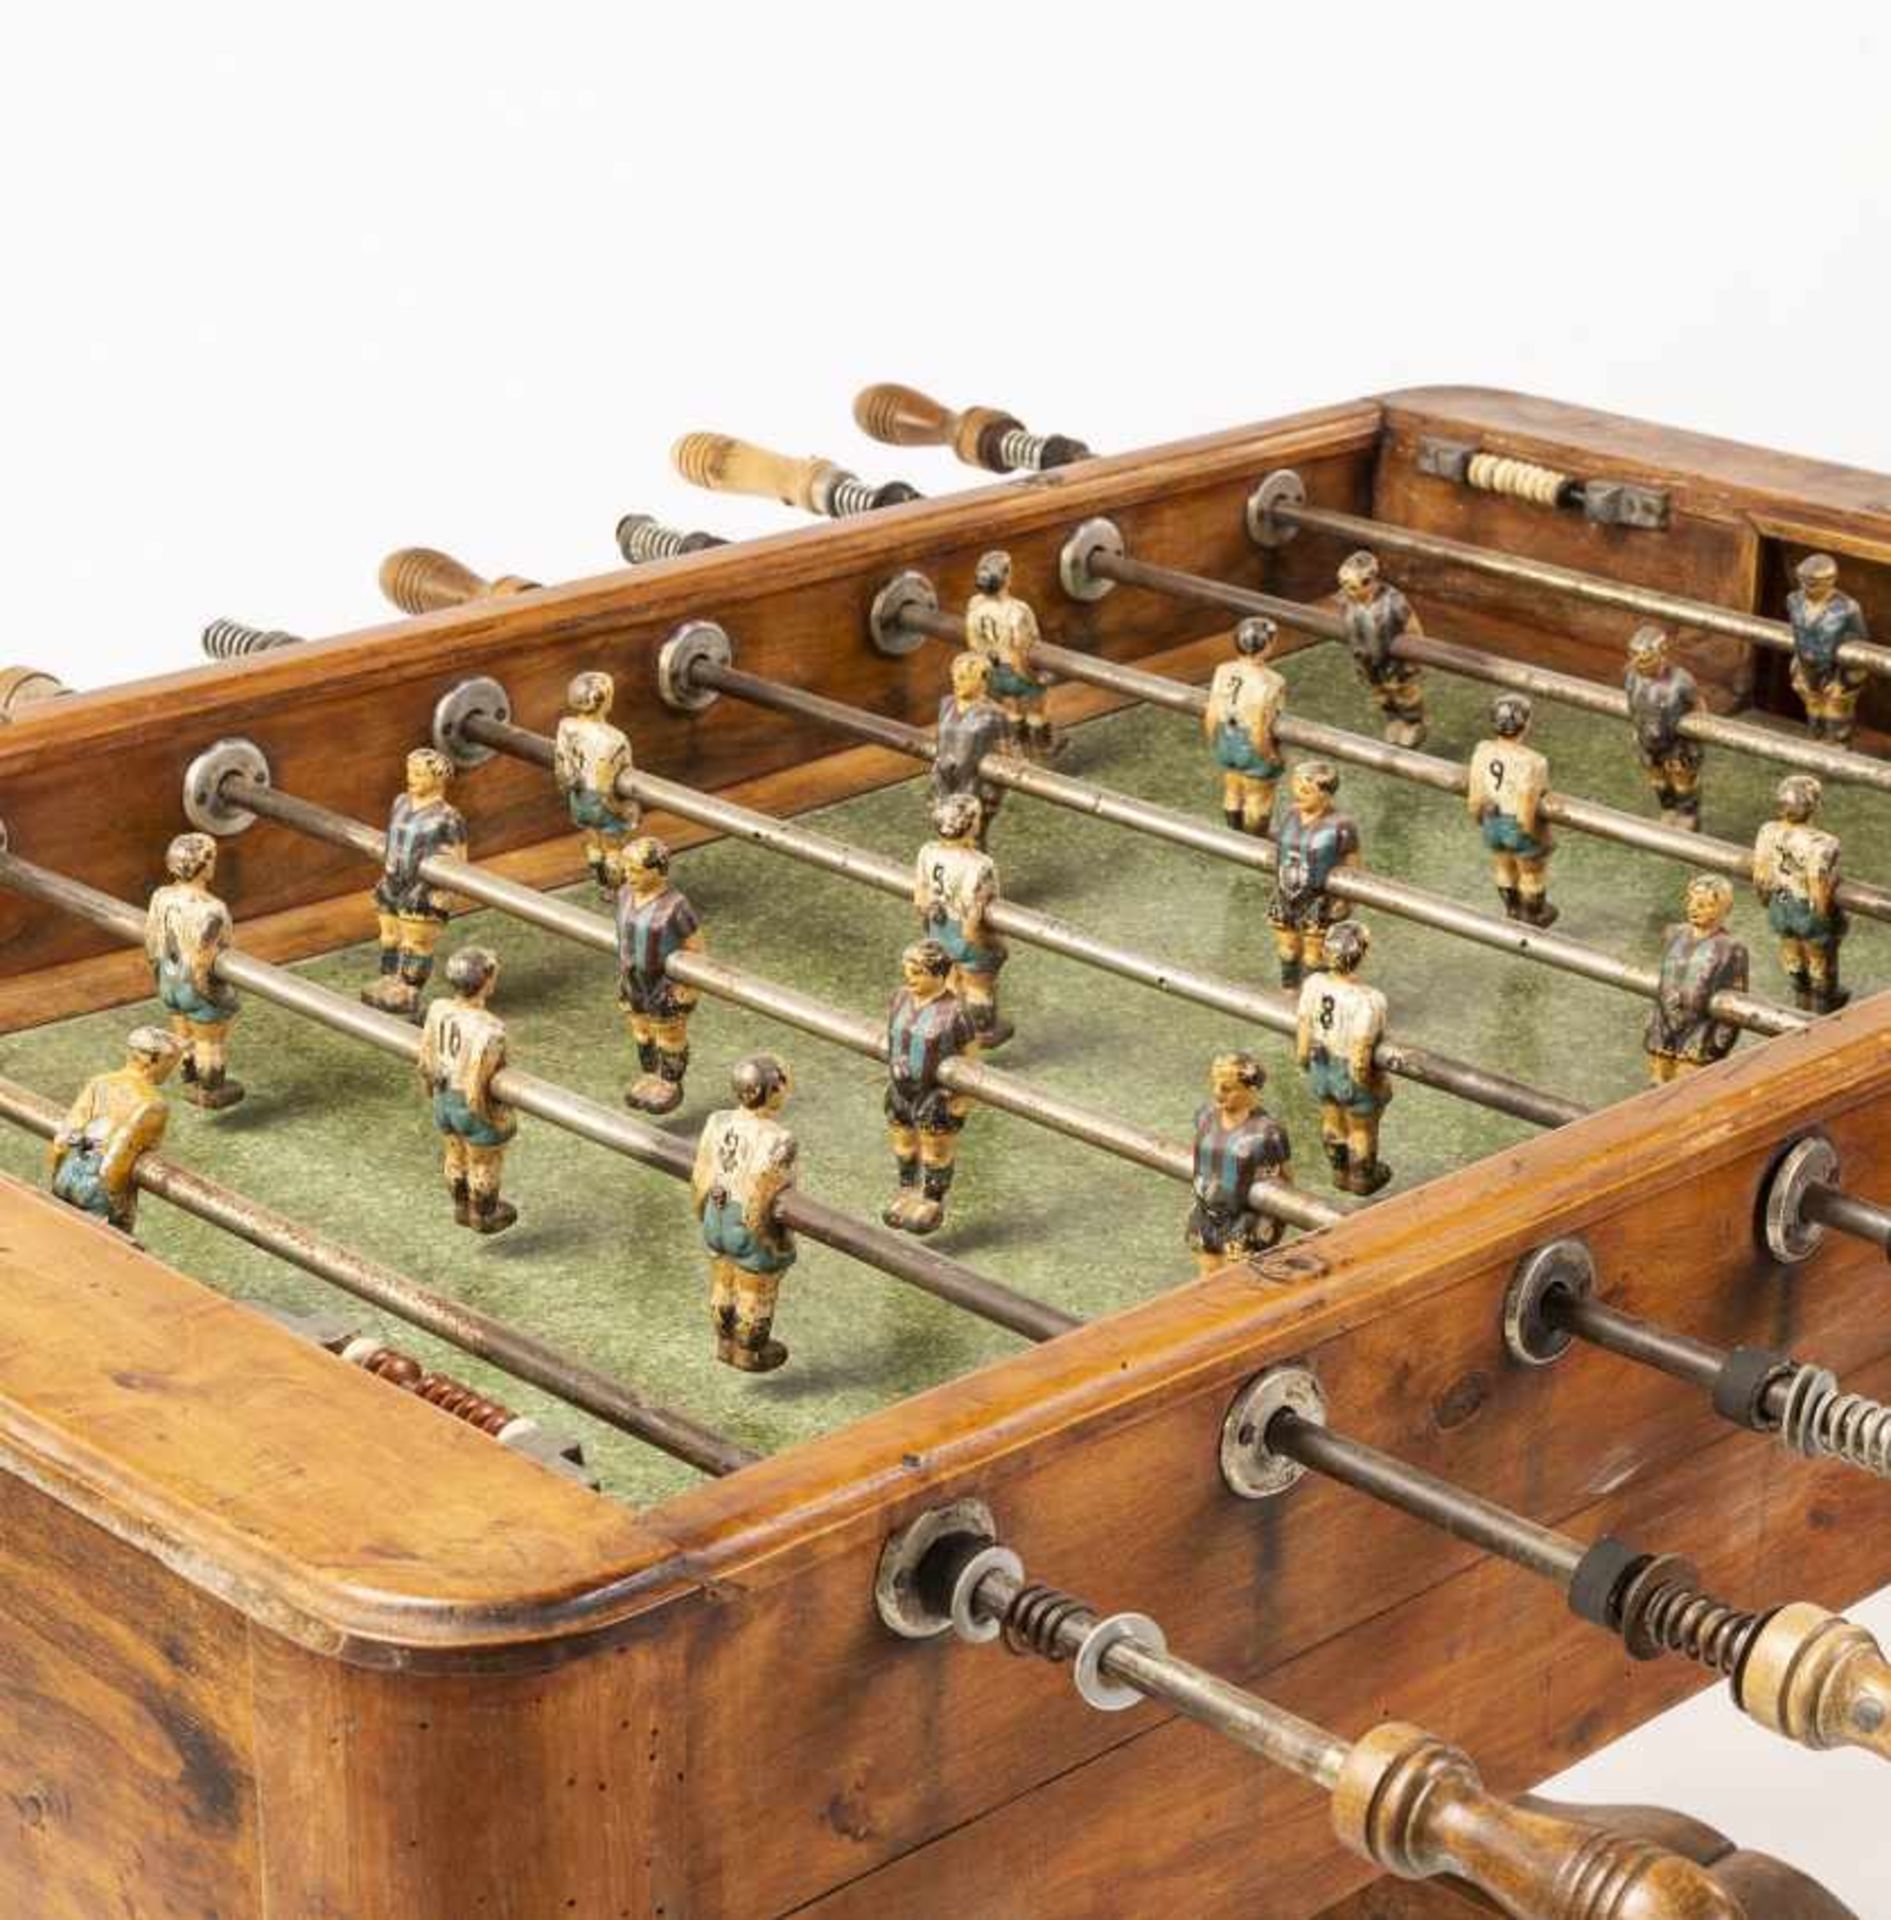 Spanish table football in wood and metal, circa 1940-1950Spanish table football in wood and metal, - Bild 3 aus 7